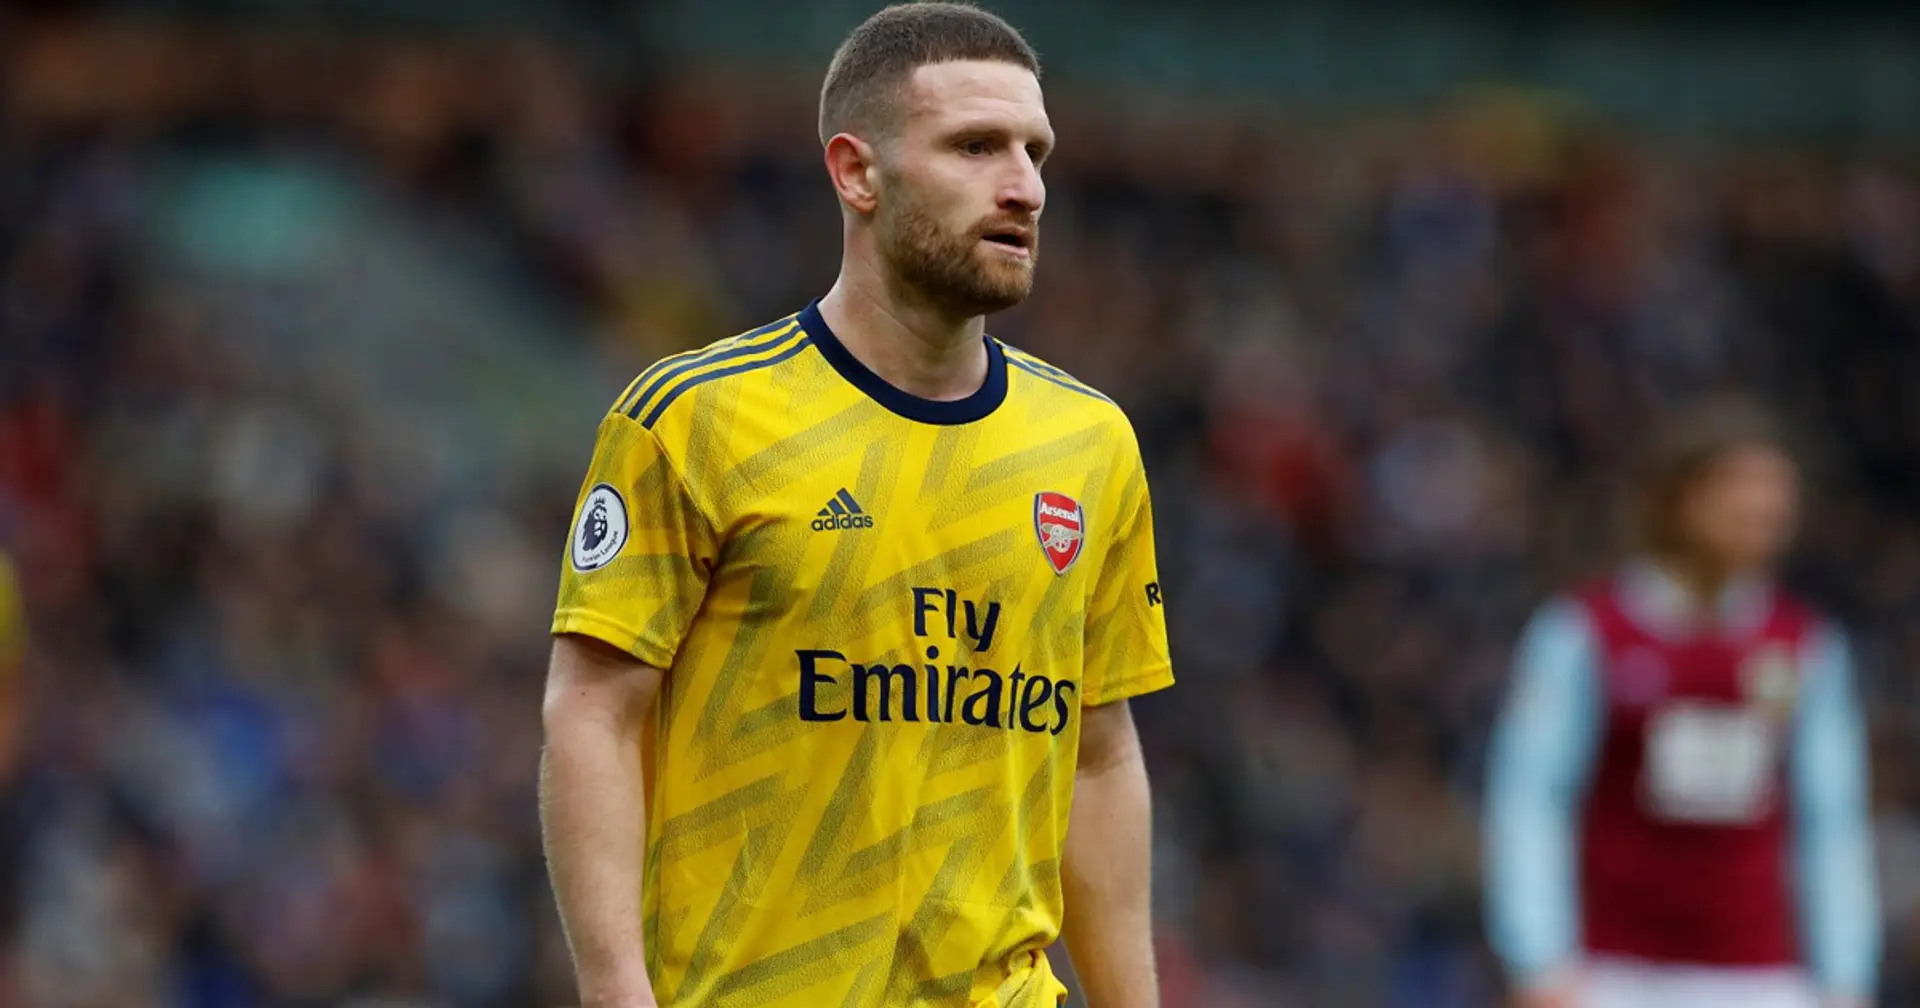 Arsenal looking to terminate Mustafi's contract this January (reliability: 4 stars)